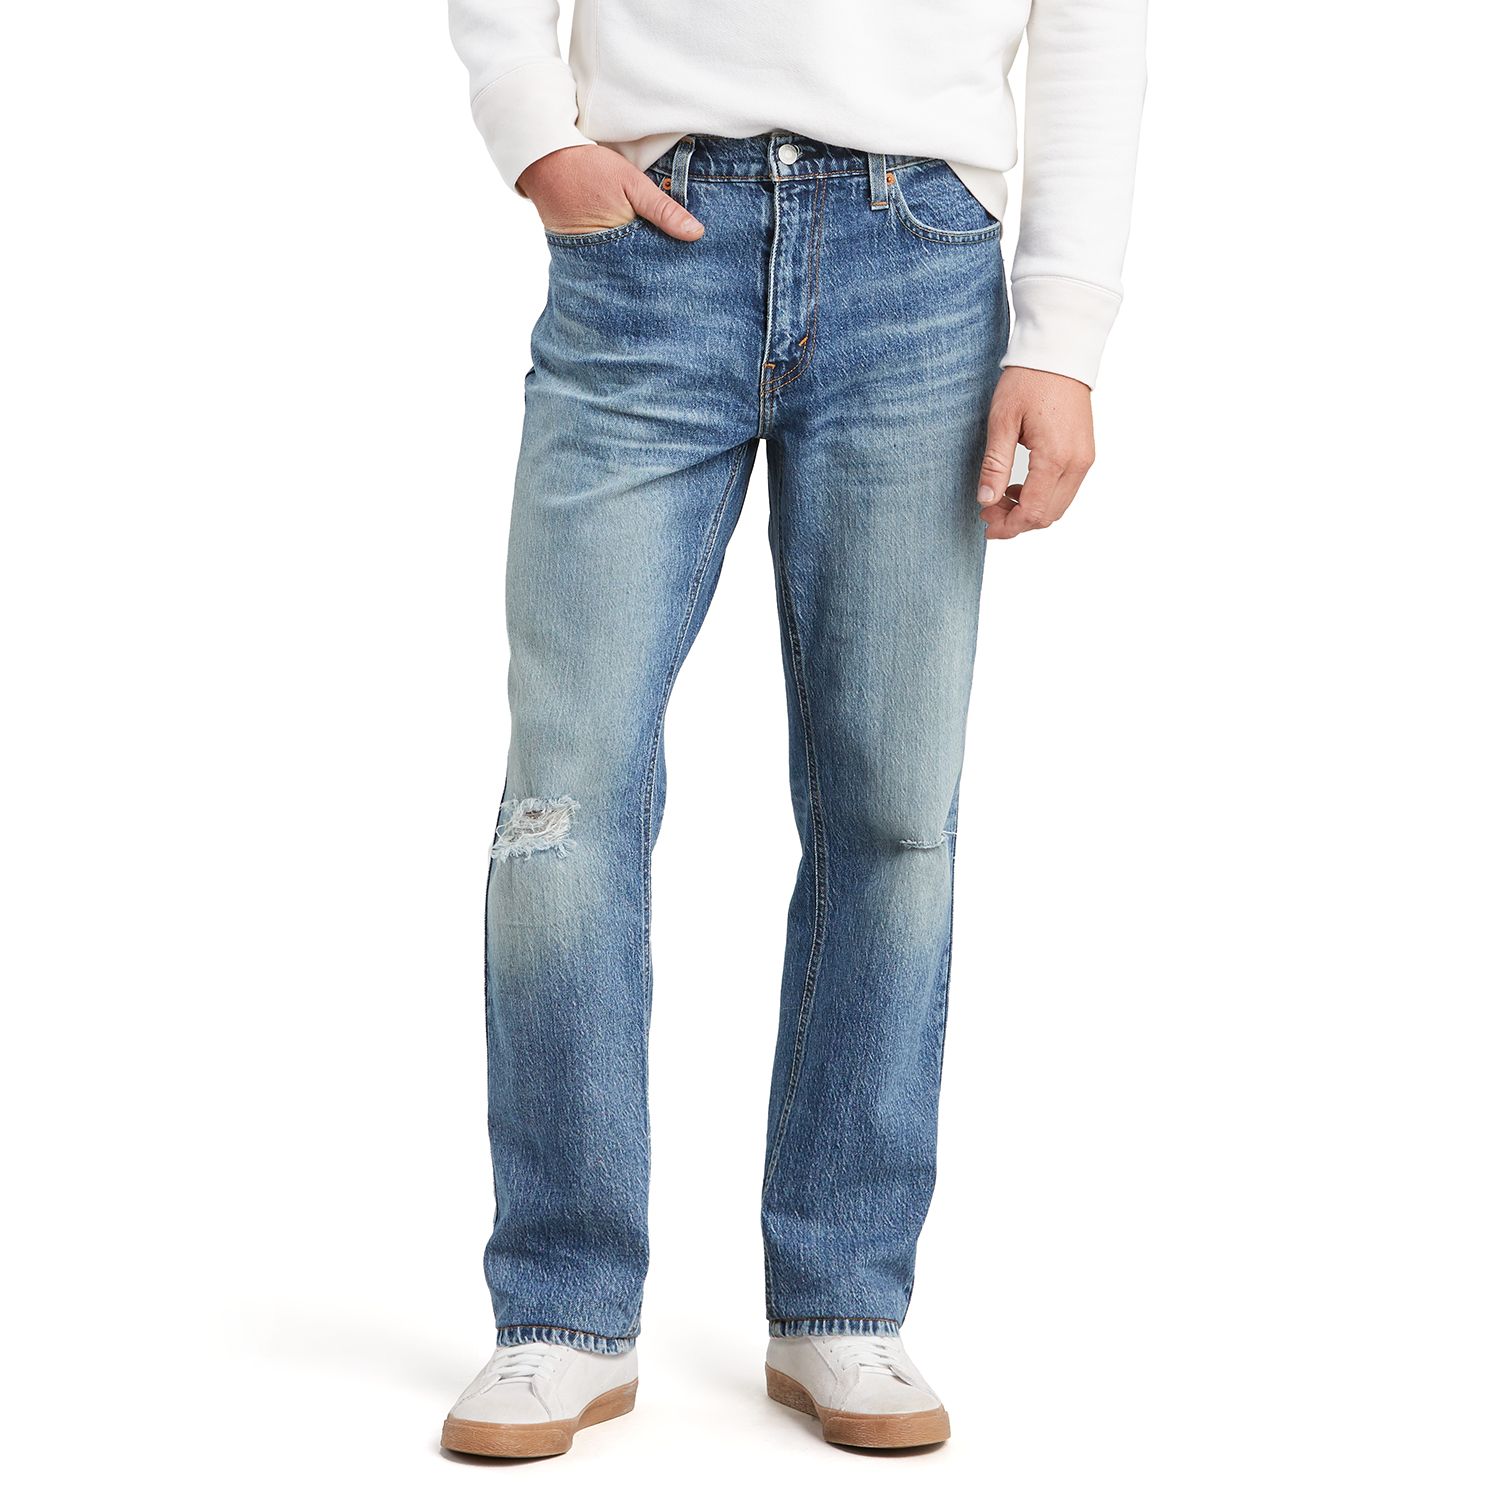 541™ Athletic Taper Stretch Jeans